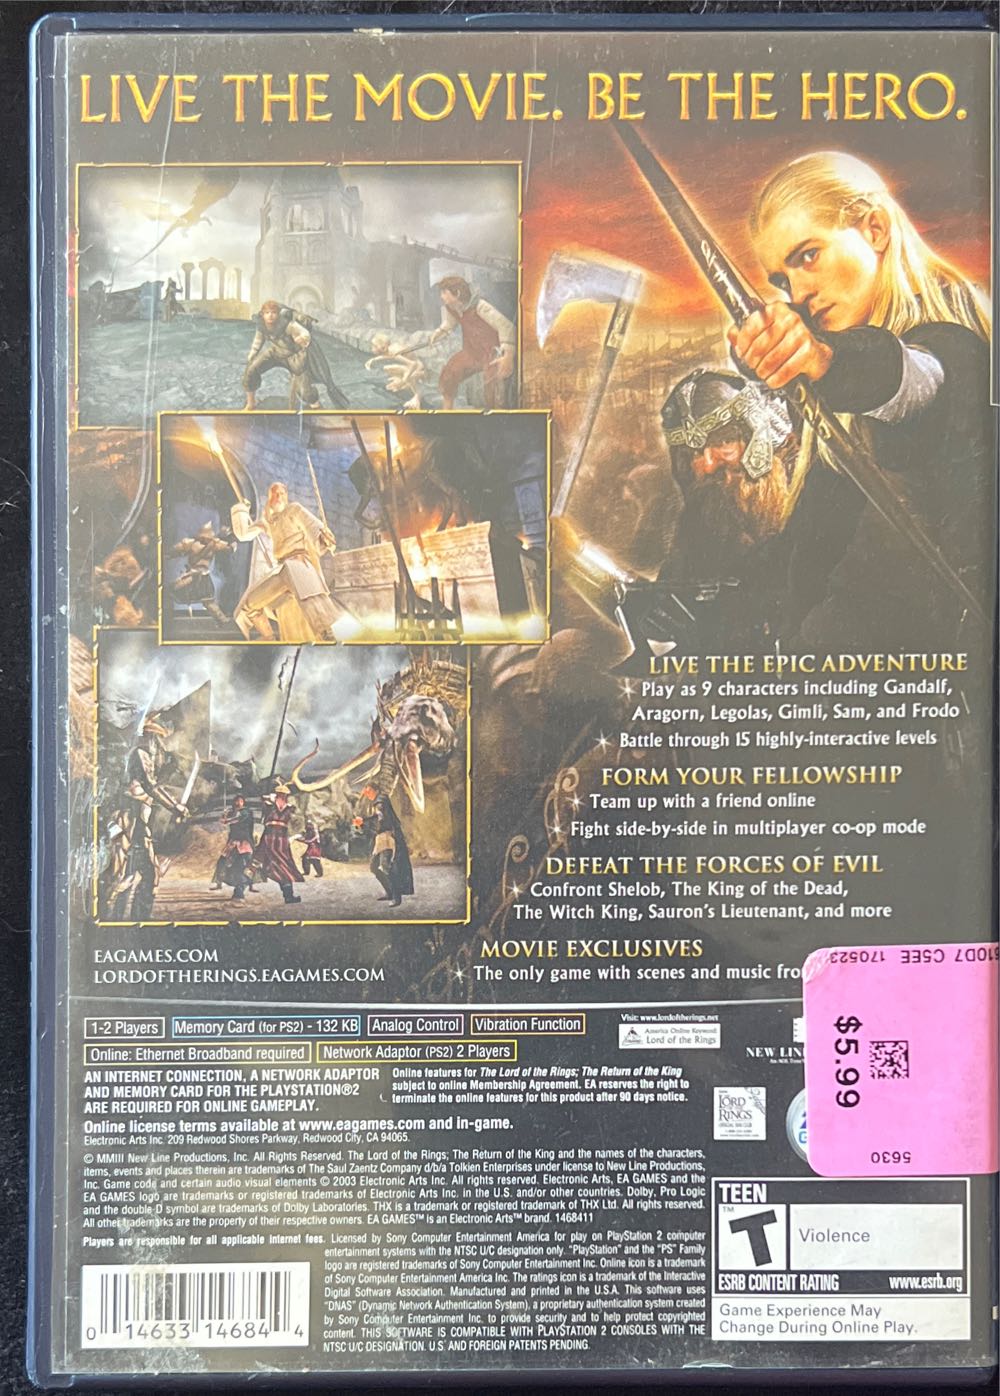 The Lord Of The Rings: The Return Of The King - Sony PlayStation 2 (PS2) video game collectible - Main Image 2